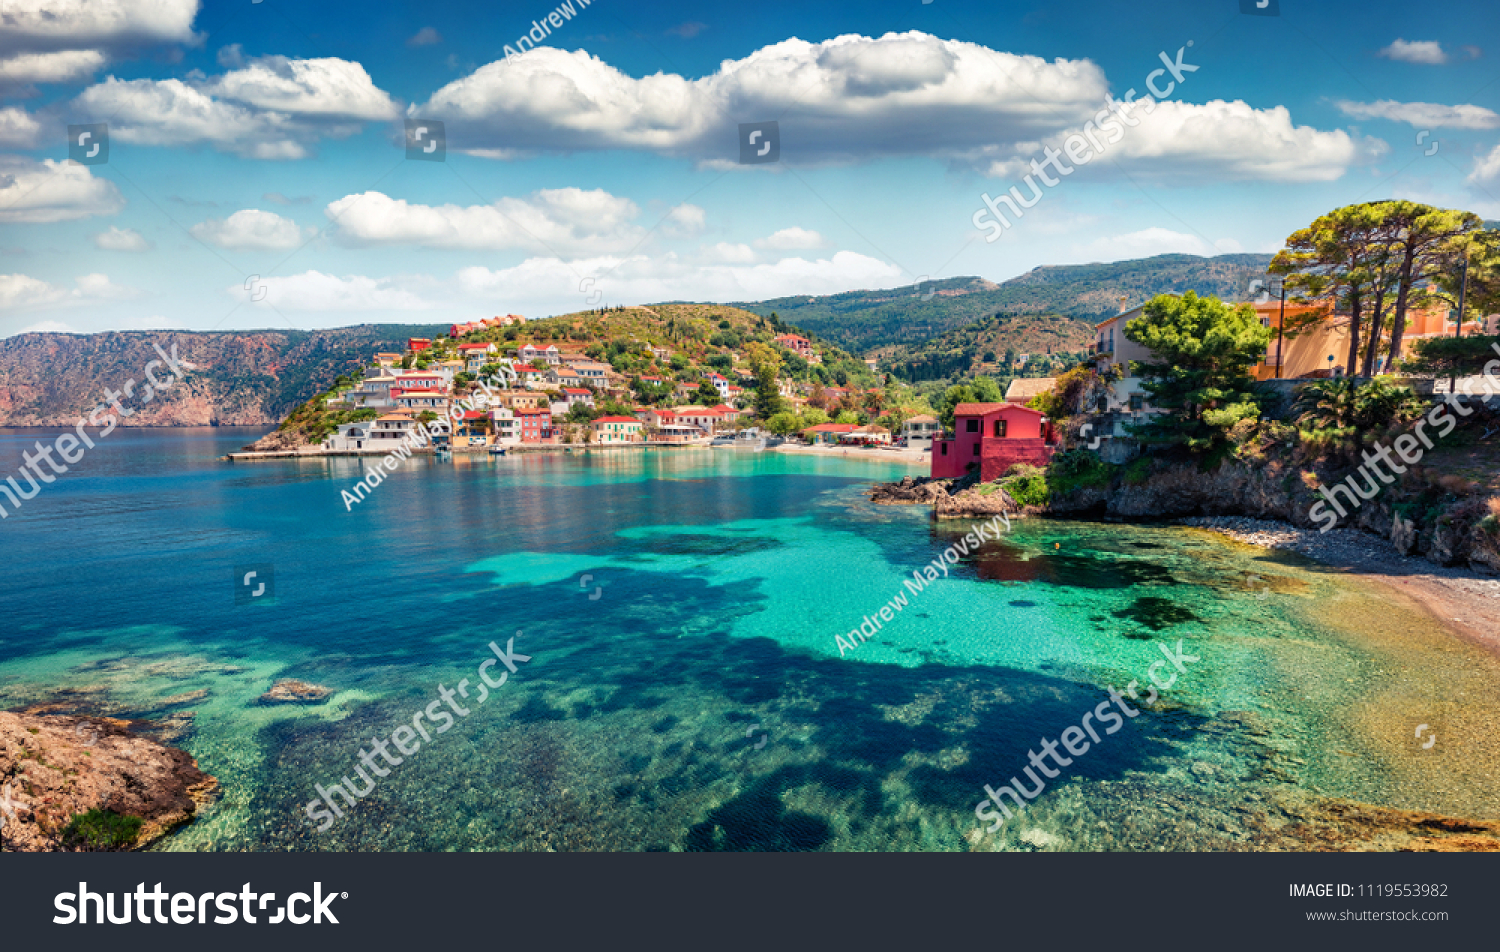 Spectacular morning cityscape of Asos village on the west coast of the island of Cephalonia, Greece, Europe. Splendid spring sescape of Ionian Sea. Traveling concept background. #1119553982